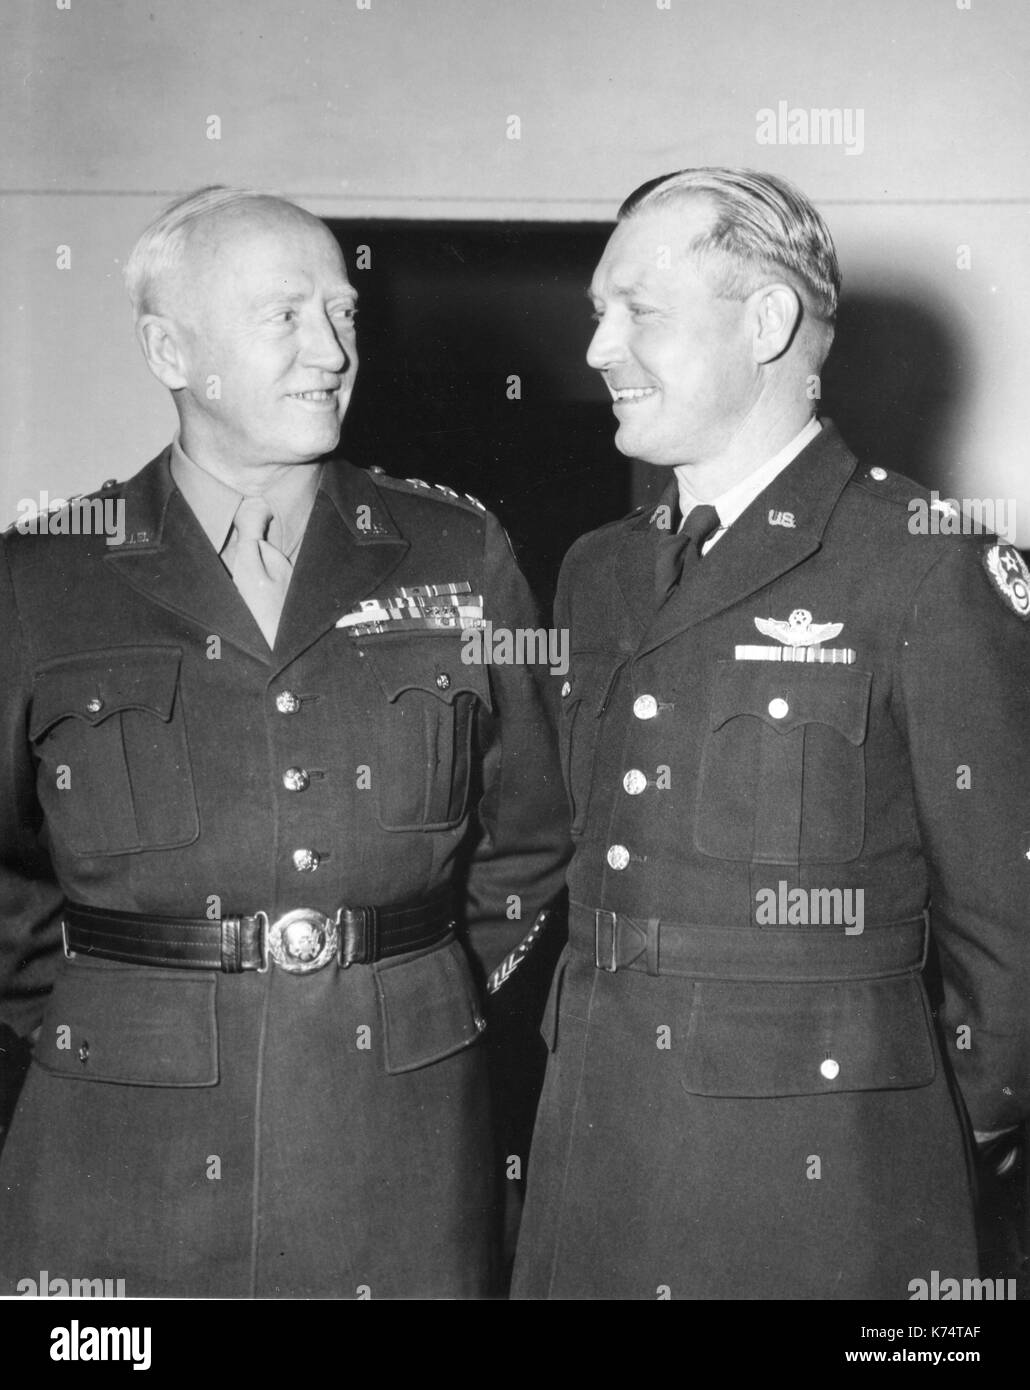 Brig Gen Otto P Weyland (right) of the Ninth Air Force, and Lt Gen George S Patton (left) of the US Third Army discuss plans for operations against von Rundstedt's armies in Belgium, France, 01/09/1945. Stock Photo